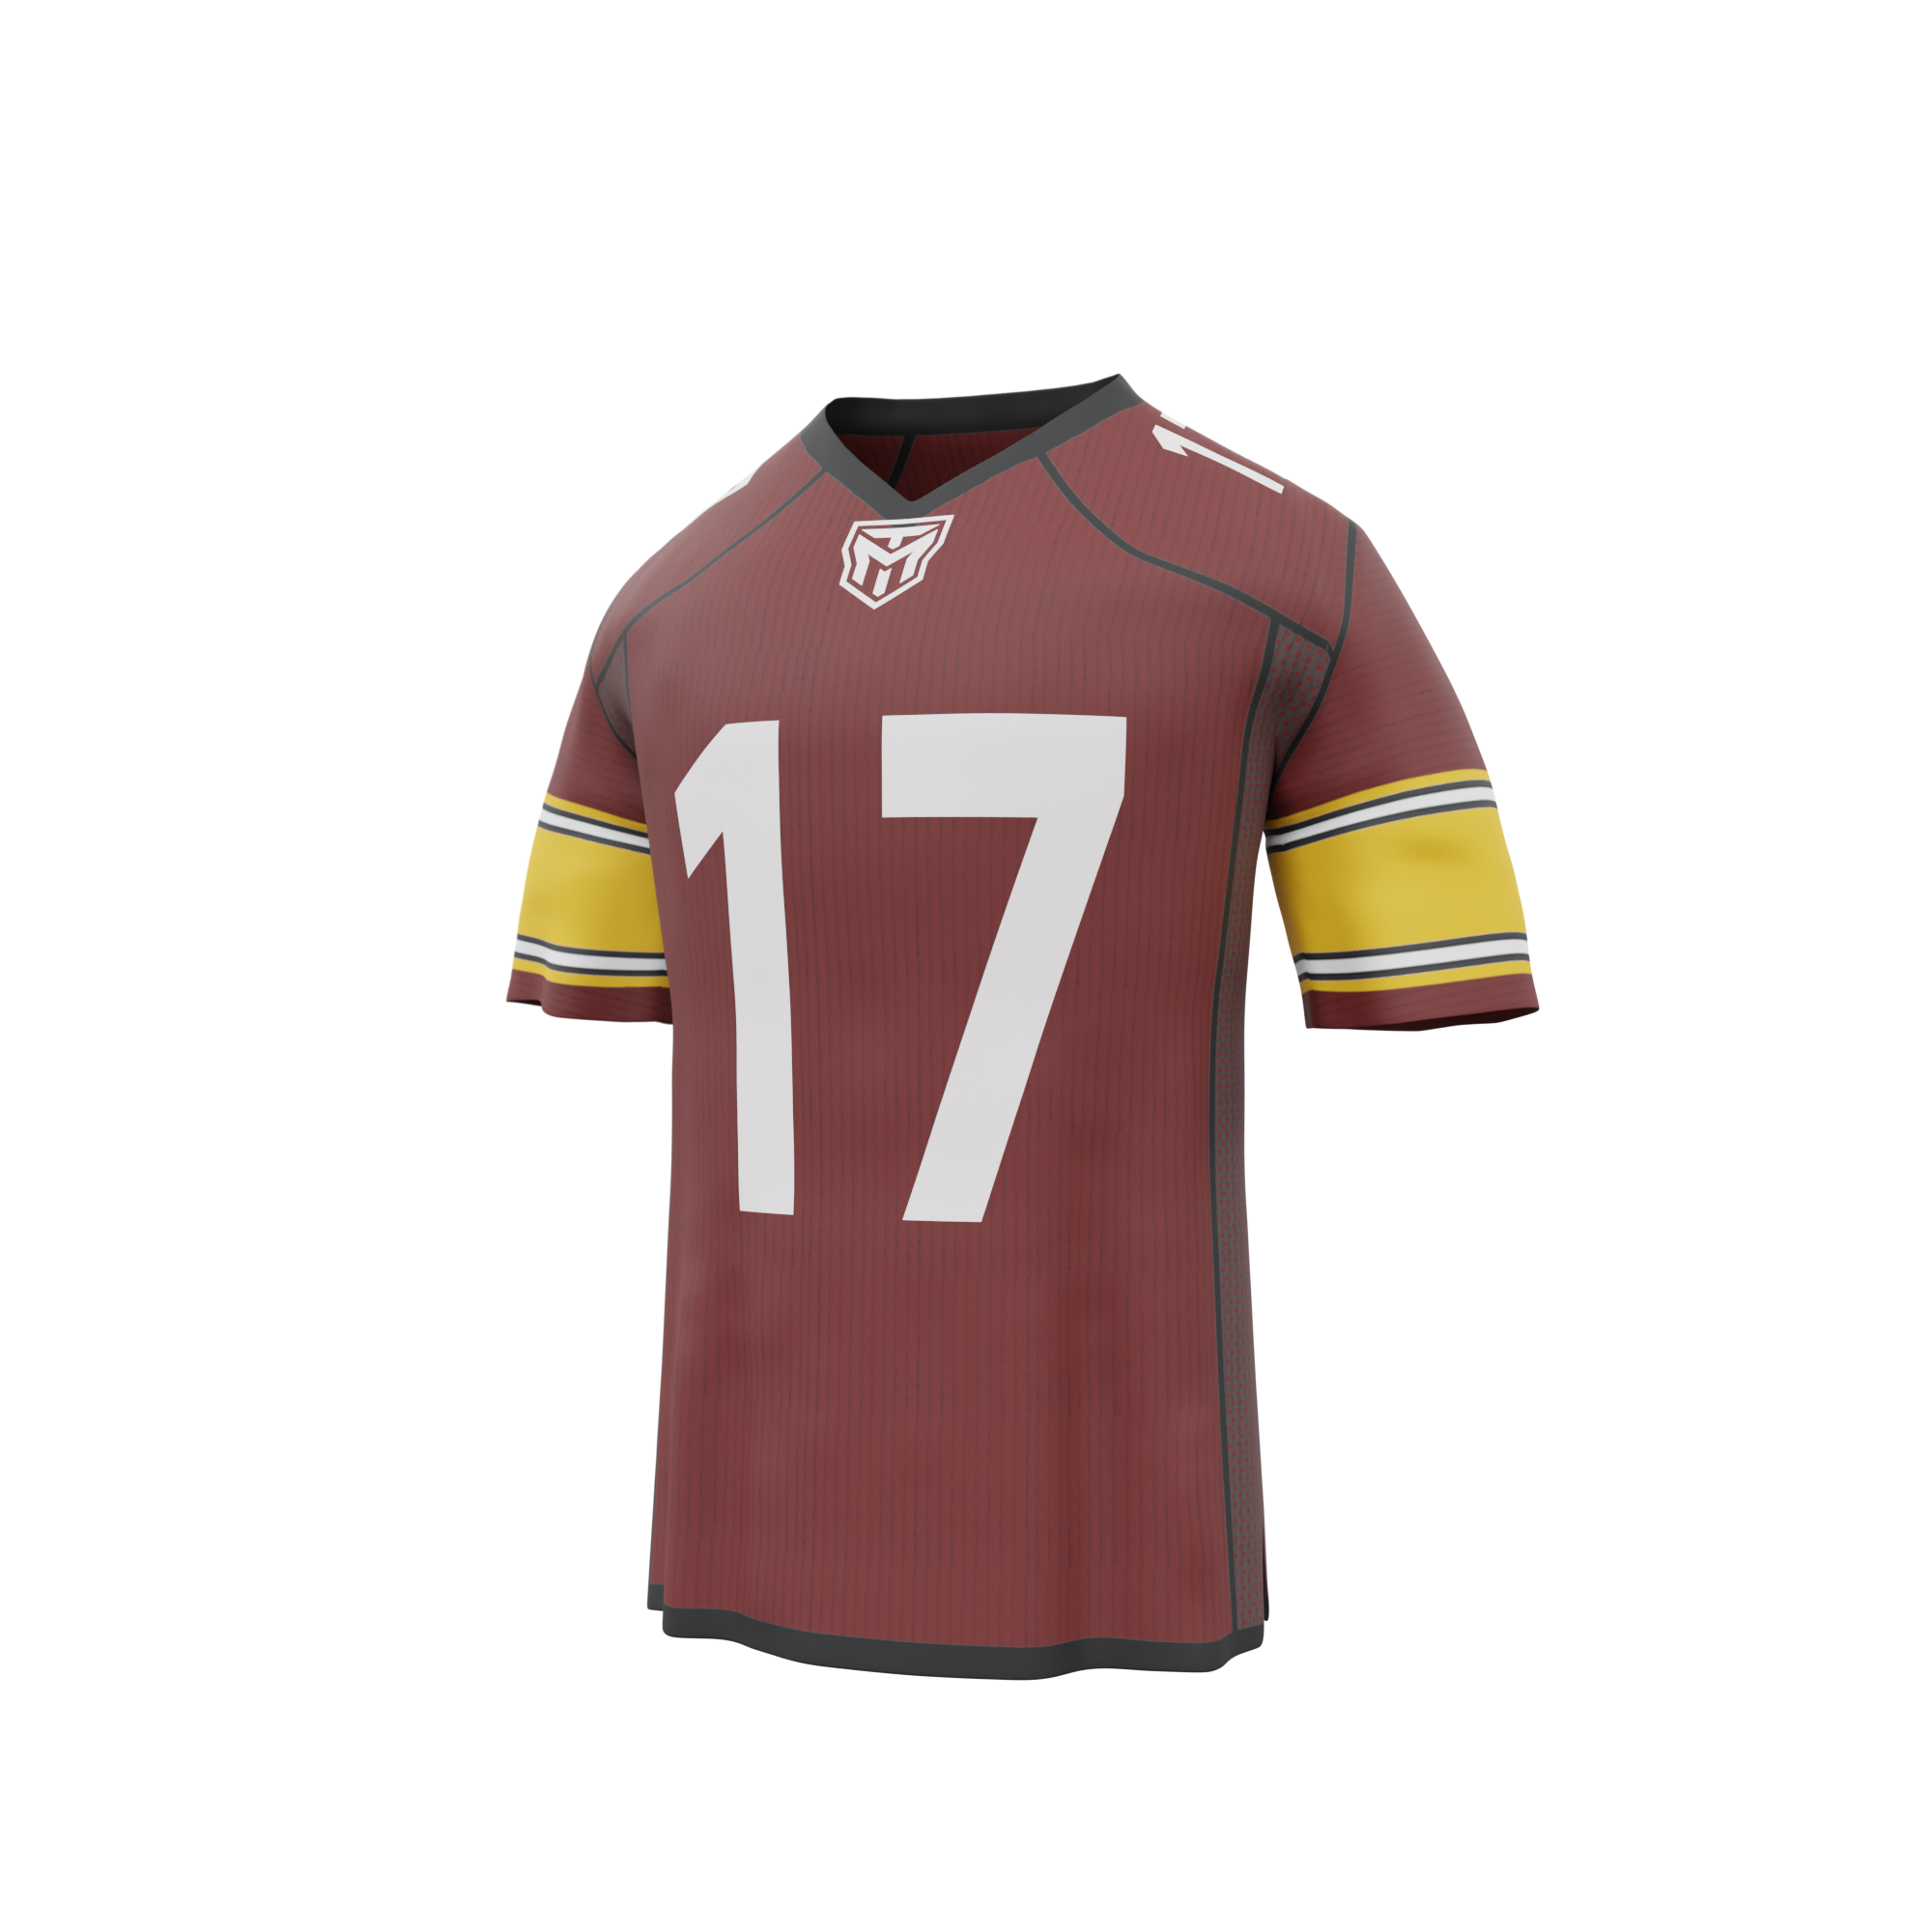 Terry McLaurin "First Pro Game" Football Jersey